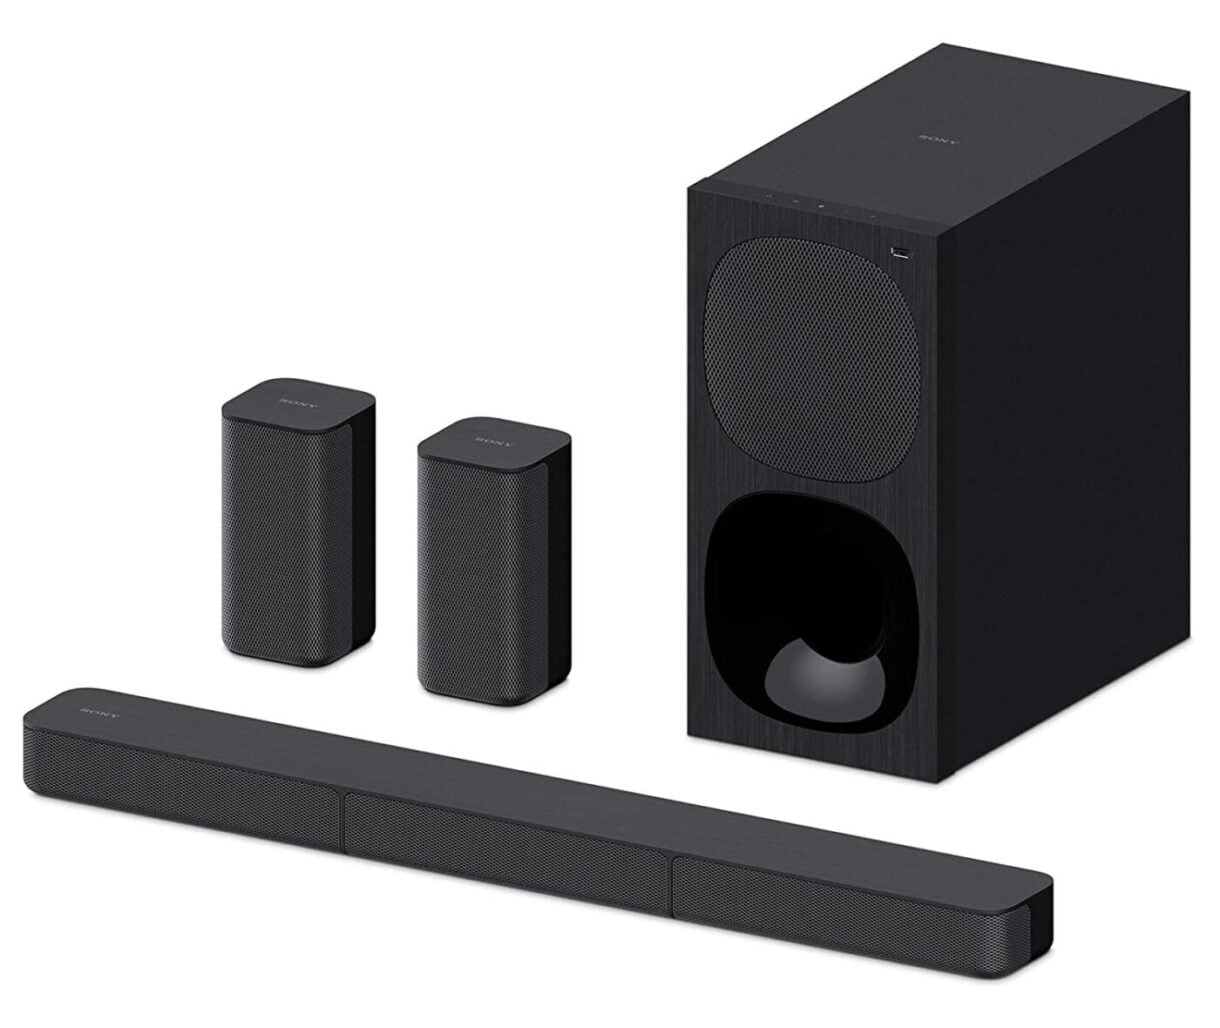 Sony HT-S20R 5.1 Channel Dolby Digital Soundbar Home Theatre System with Bluetooth Connectivity